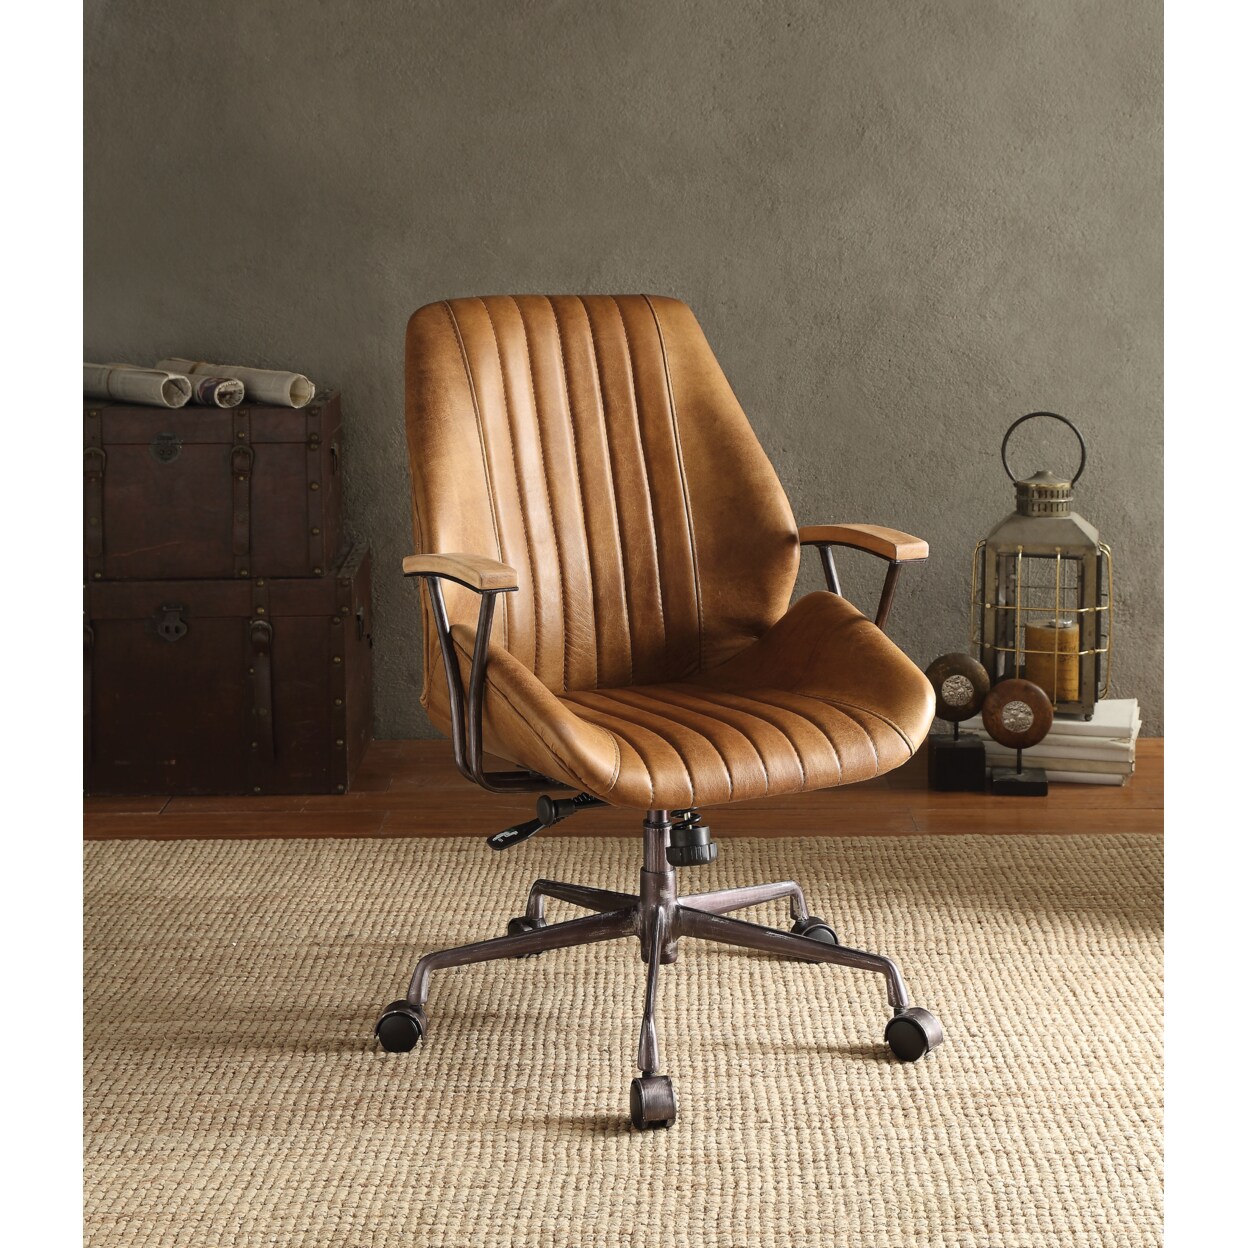 Williston Forge Albaugh Suede Executive Chair & Reviews